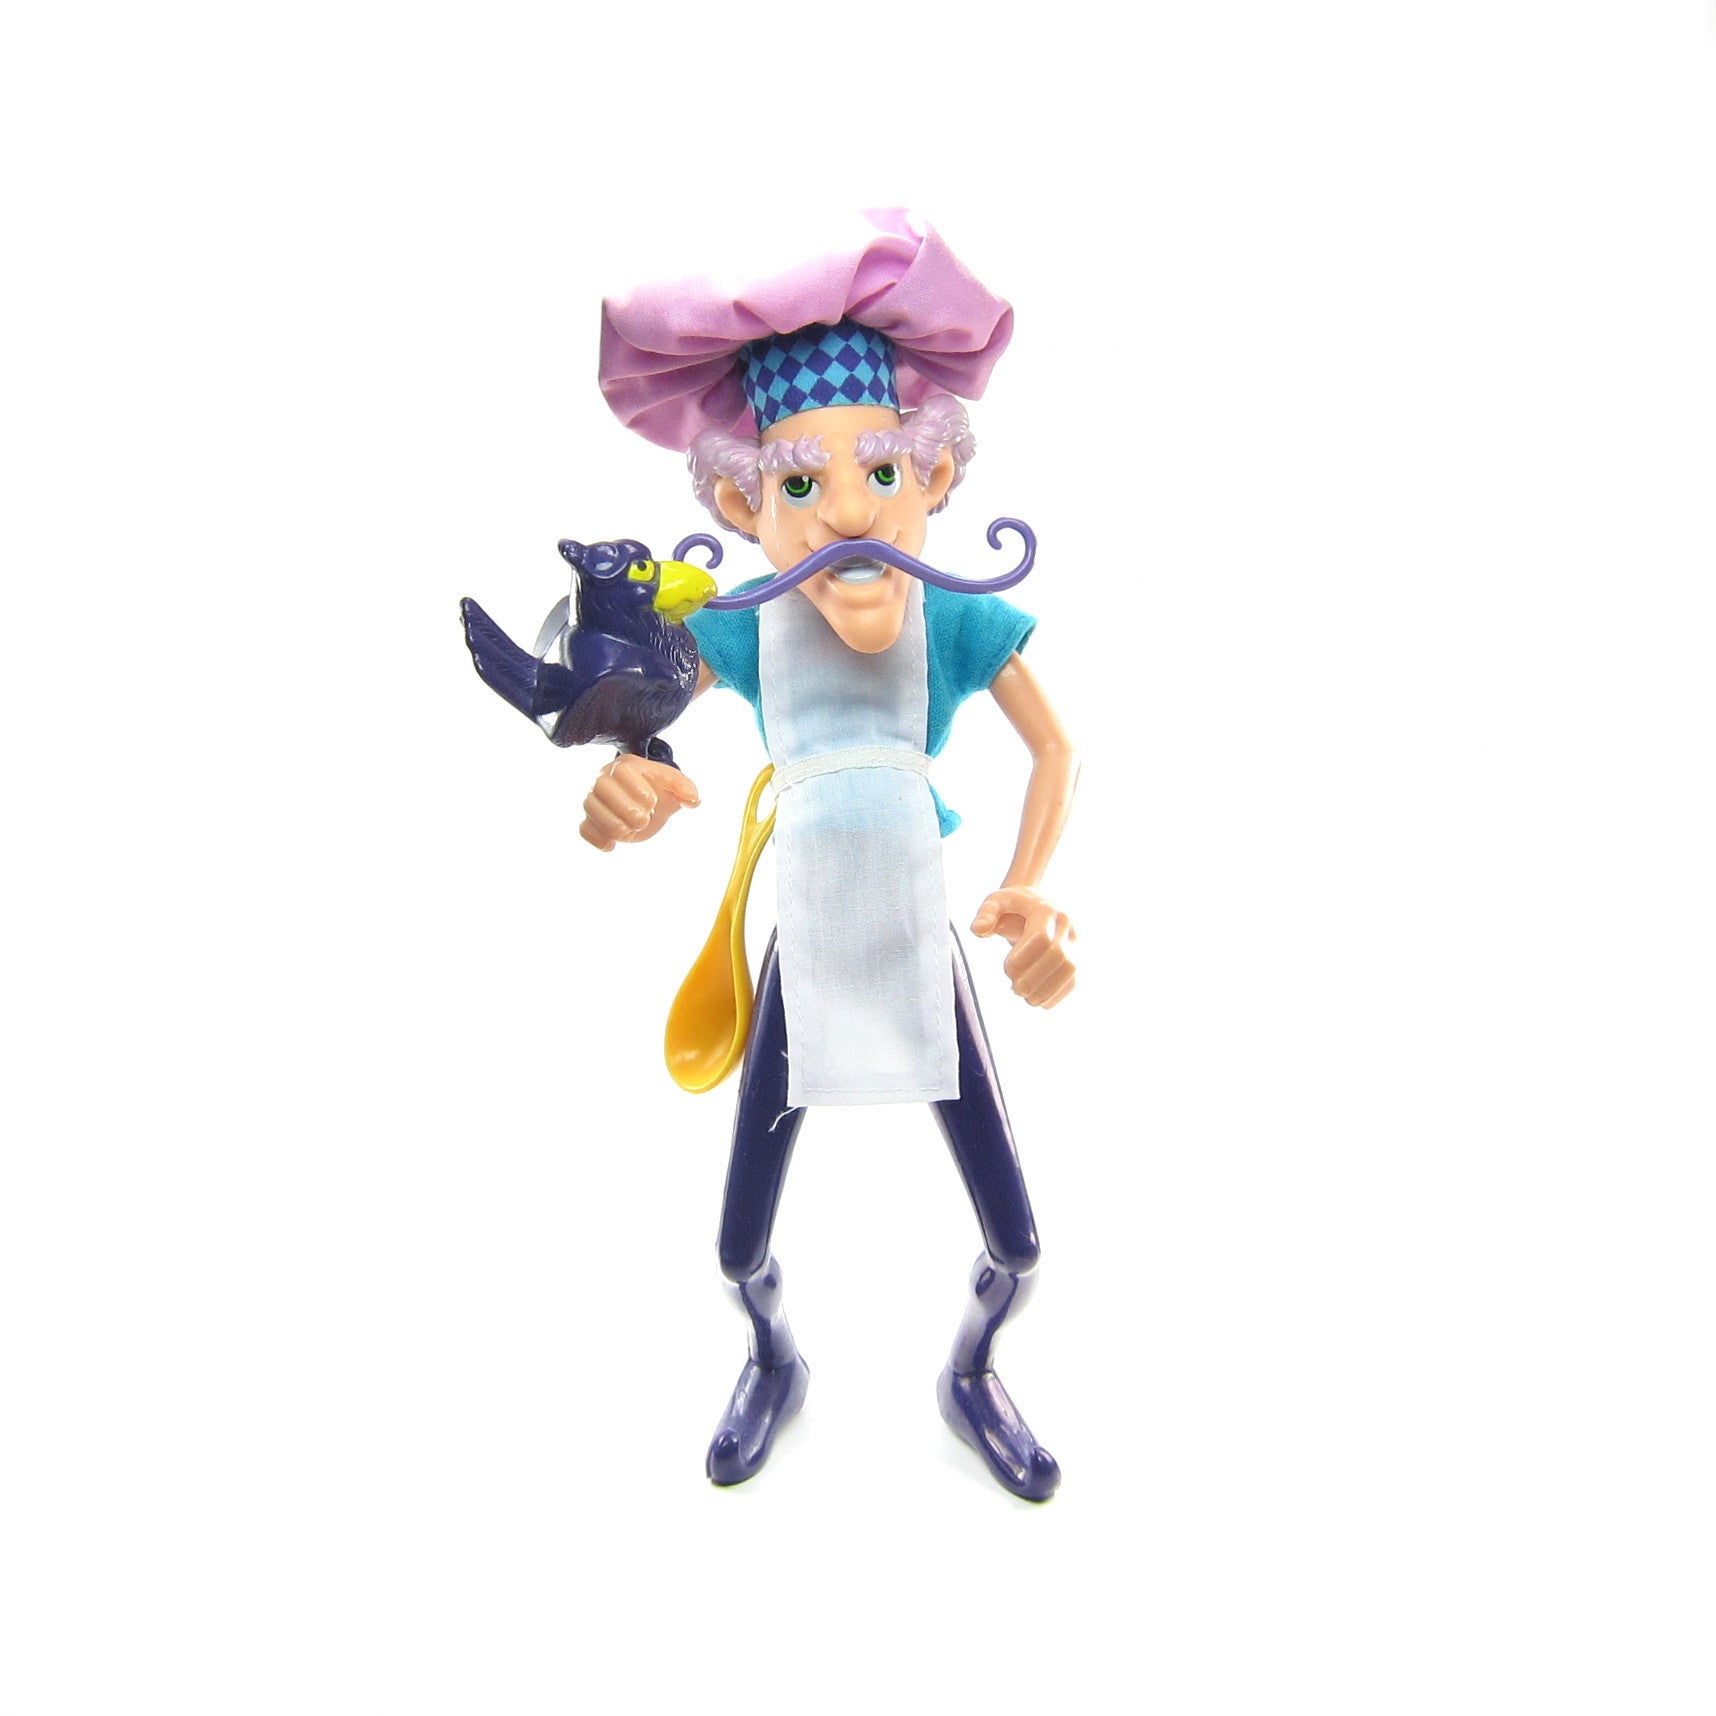 Purple Pie Man doll with spoon and Berry Bird pet